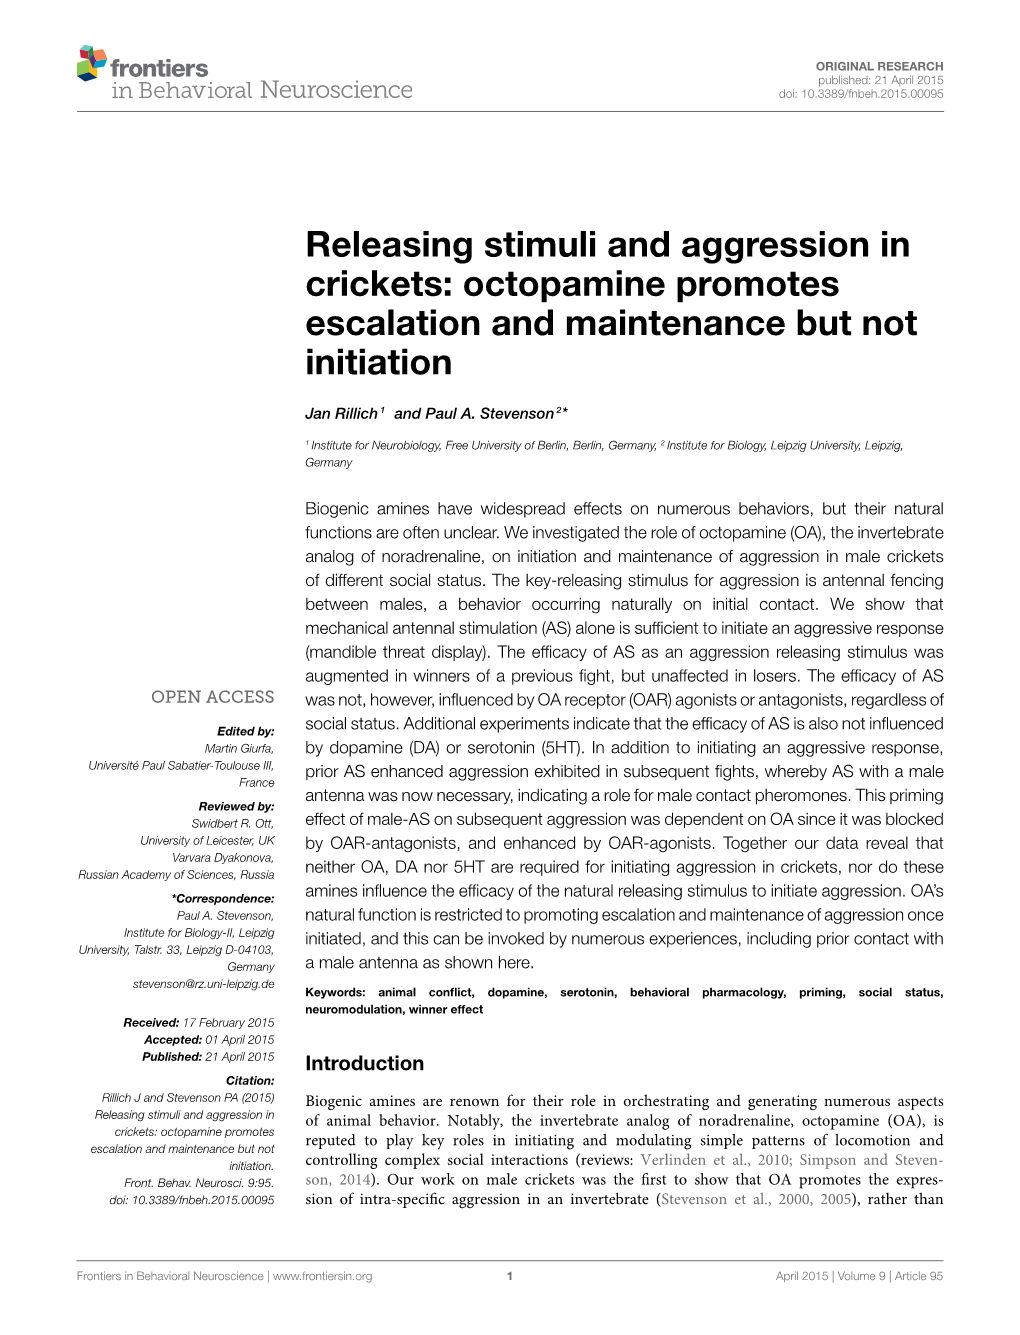 Releasing Stimuli and Aggression in Crickets: Octopamine Promotes Escalation and Maintenance but Not Initiation